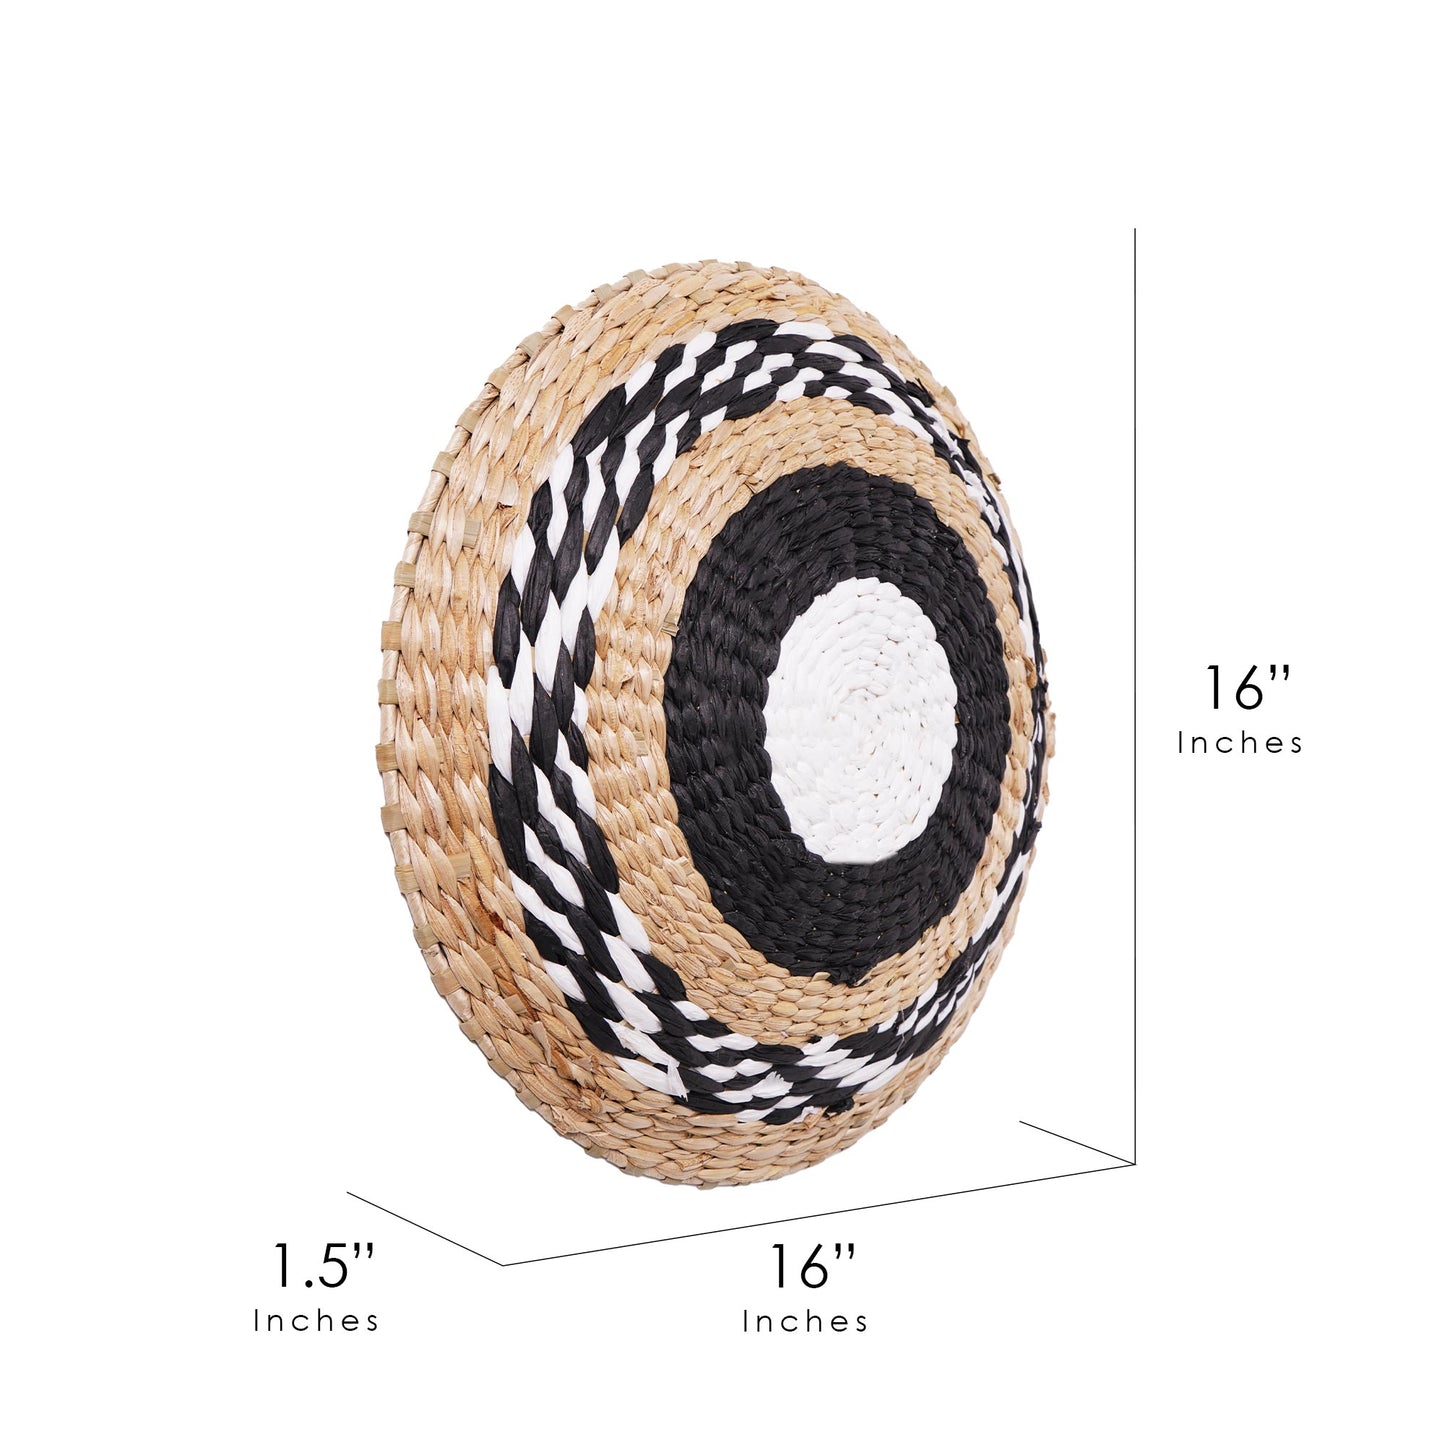 Woven Seaweed Hanging Wall Accent Basket - Black, Natural, White (16")